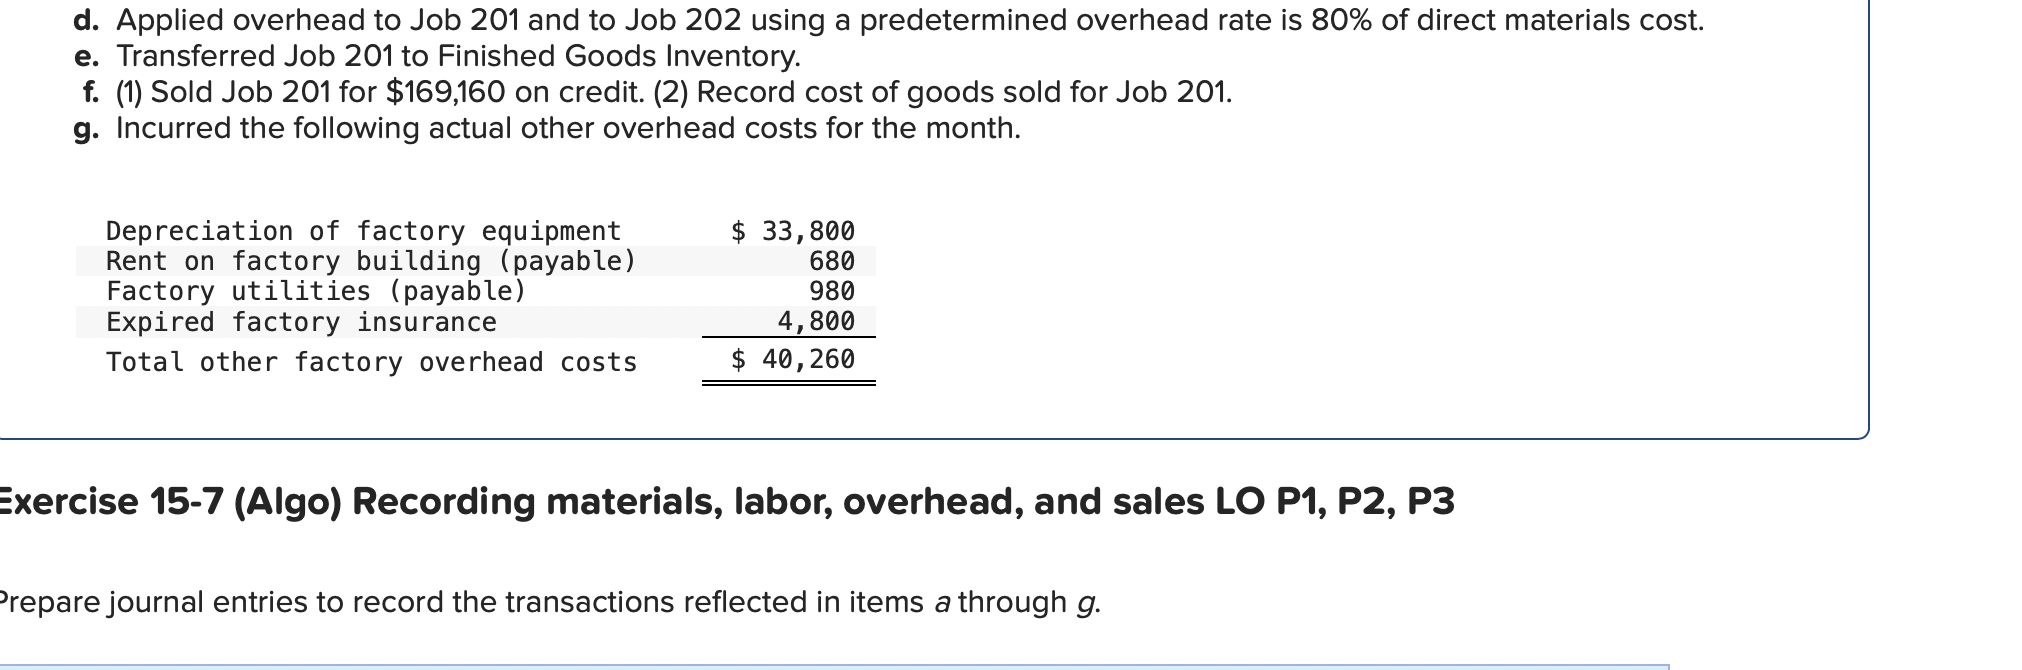 d. Applied overhead to Job 201 and to Job 202 using a predetermined overhead rate is \( 80 \% \) of direct materials cost.
e.